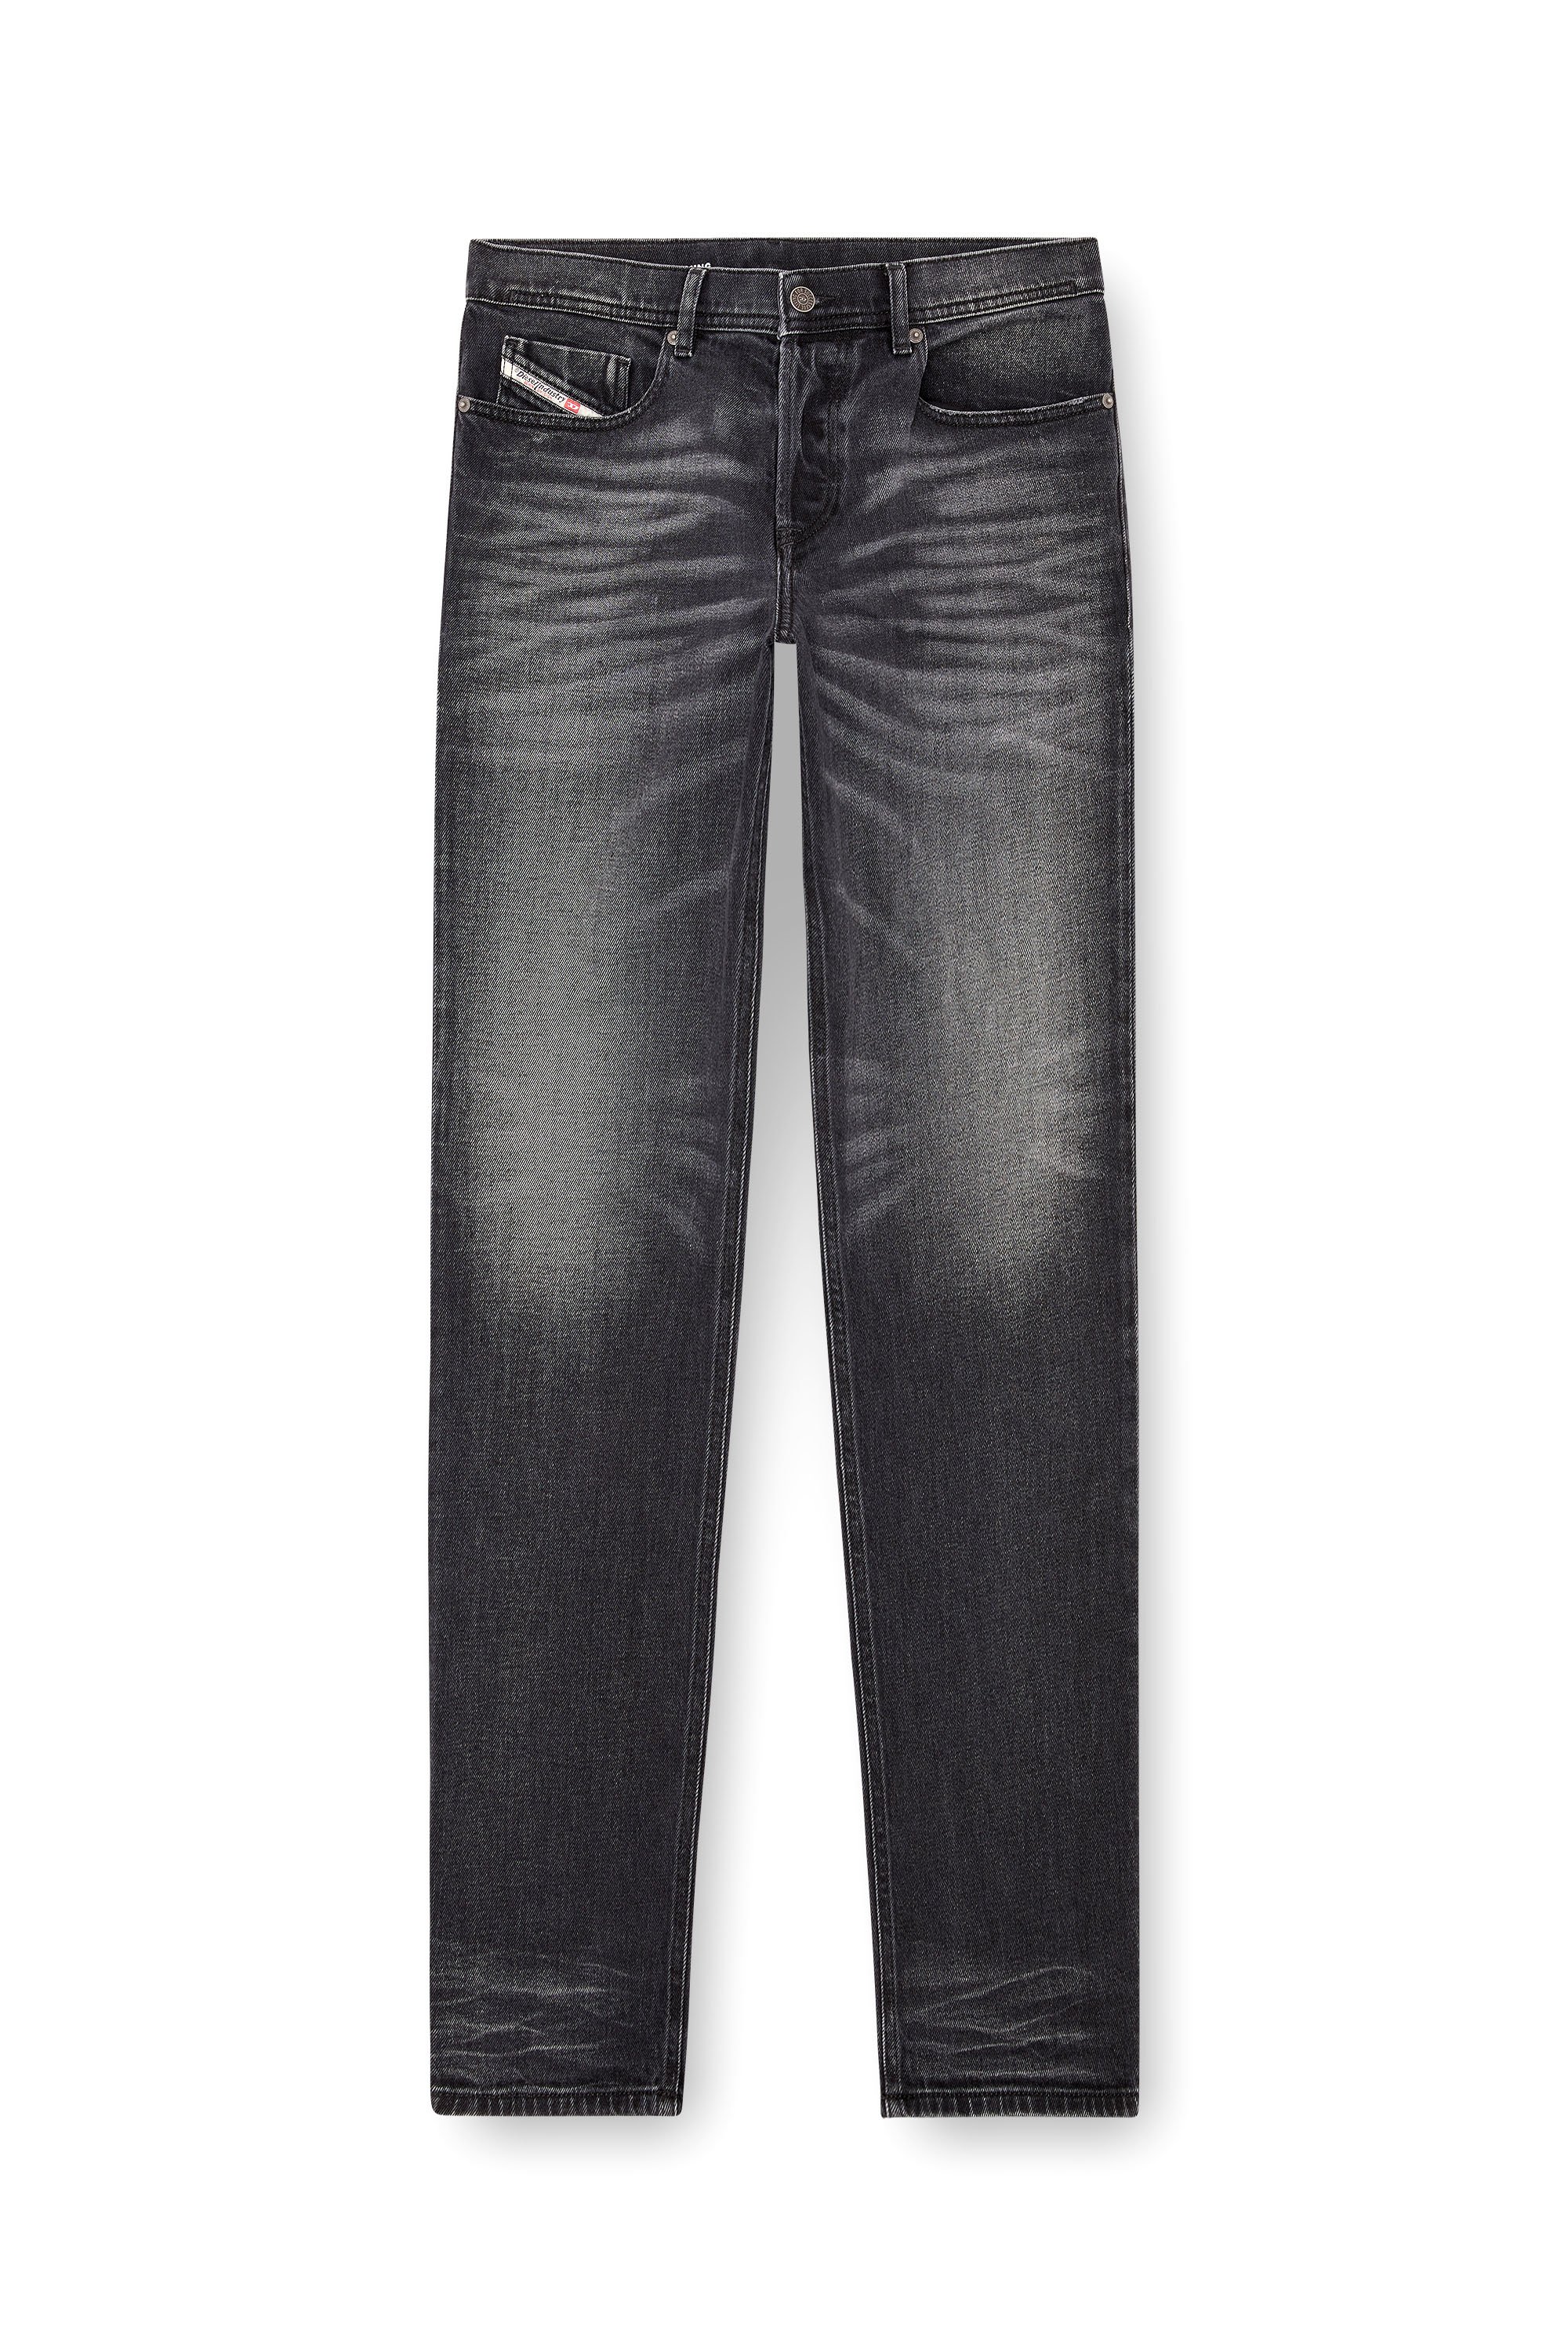 Diesel - Tapered Jeans 2023 D-Finitive 09J65, Hombre Tapered Jeans - 2023 D-Finitive in Negro - Image 5